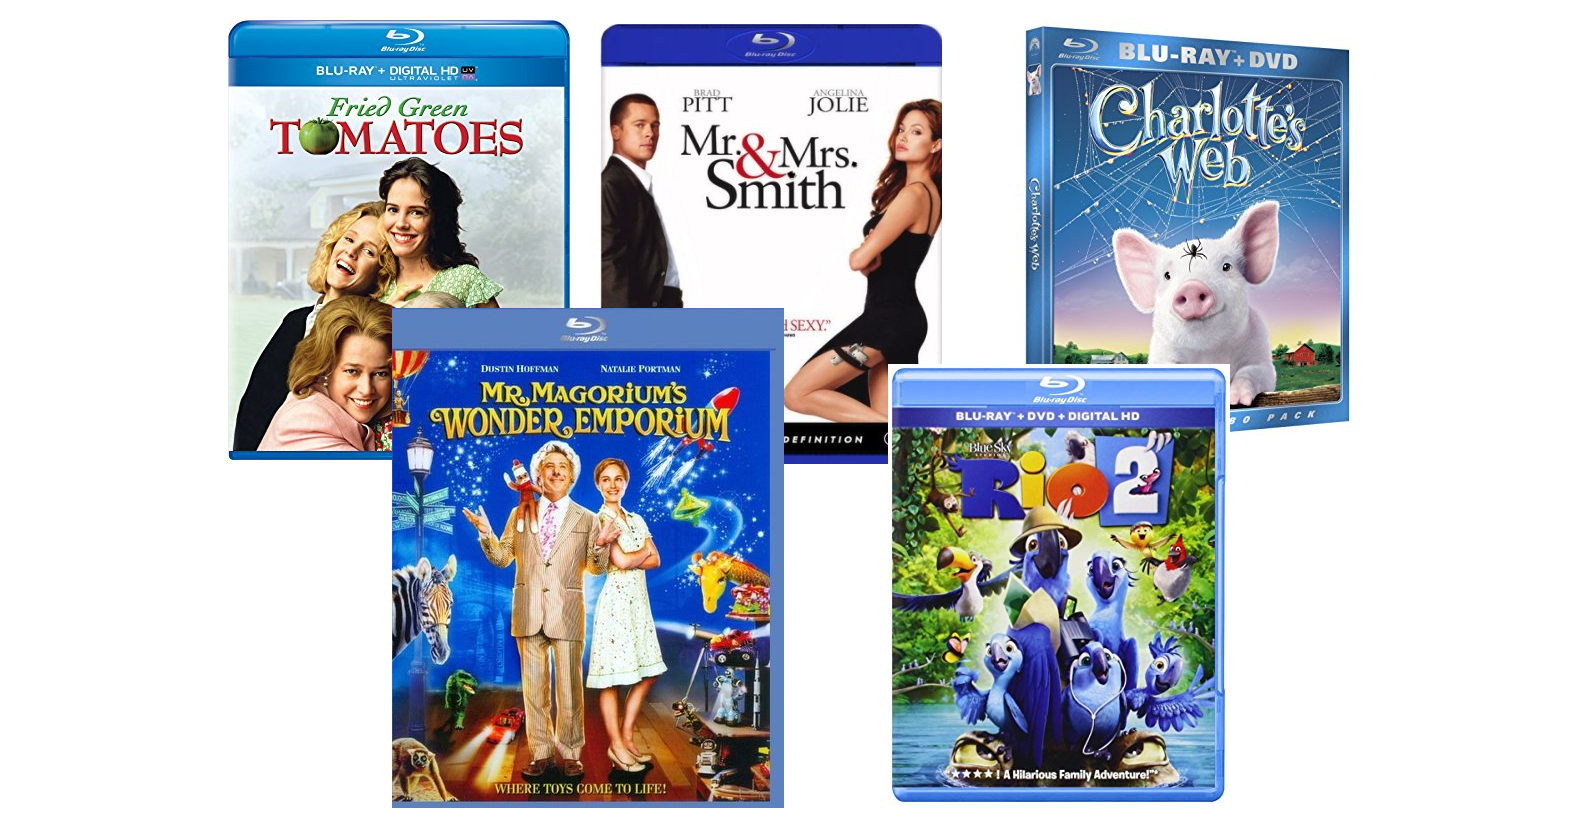 Blu-ray Movies For $5.00! Includes Rio, Mr & Mrs. Smith, Fried Green Tomatoes & More!